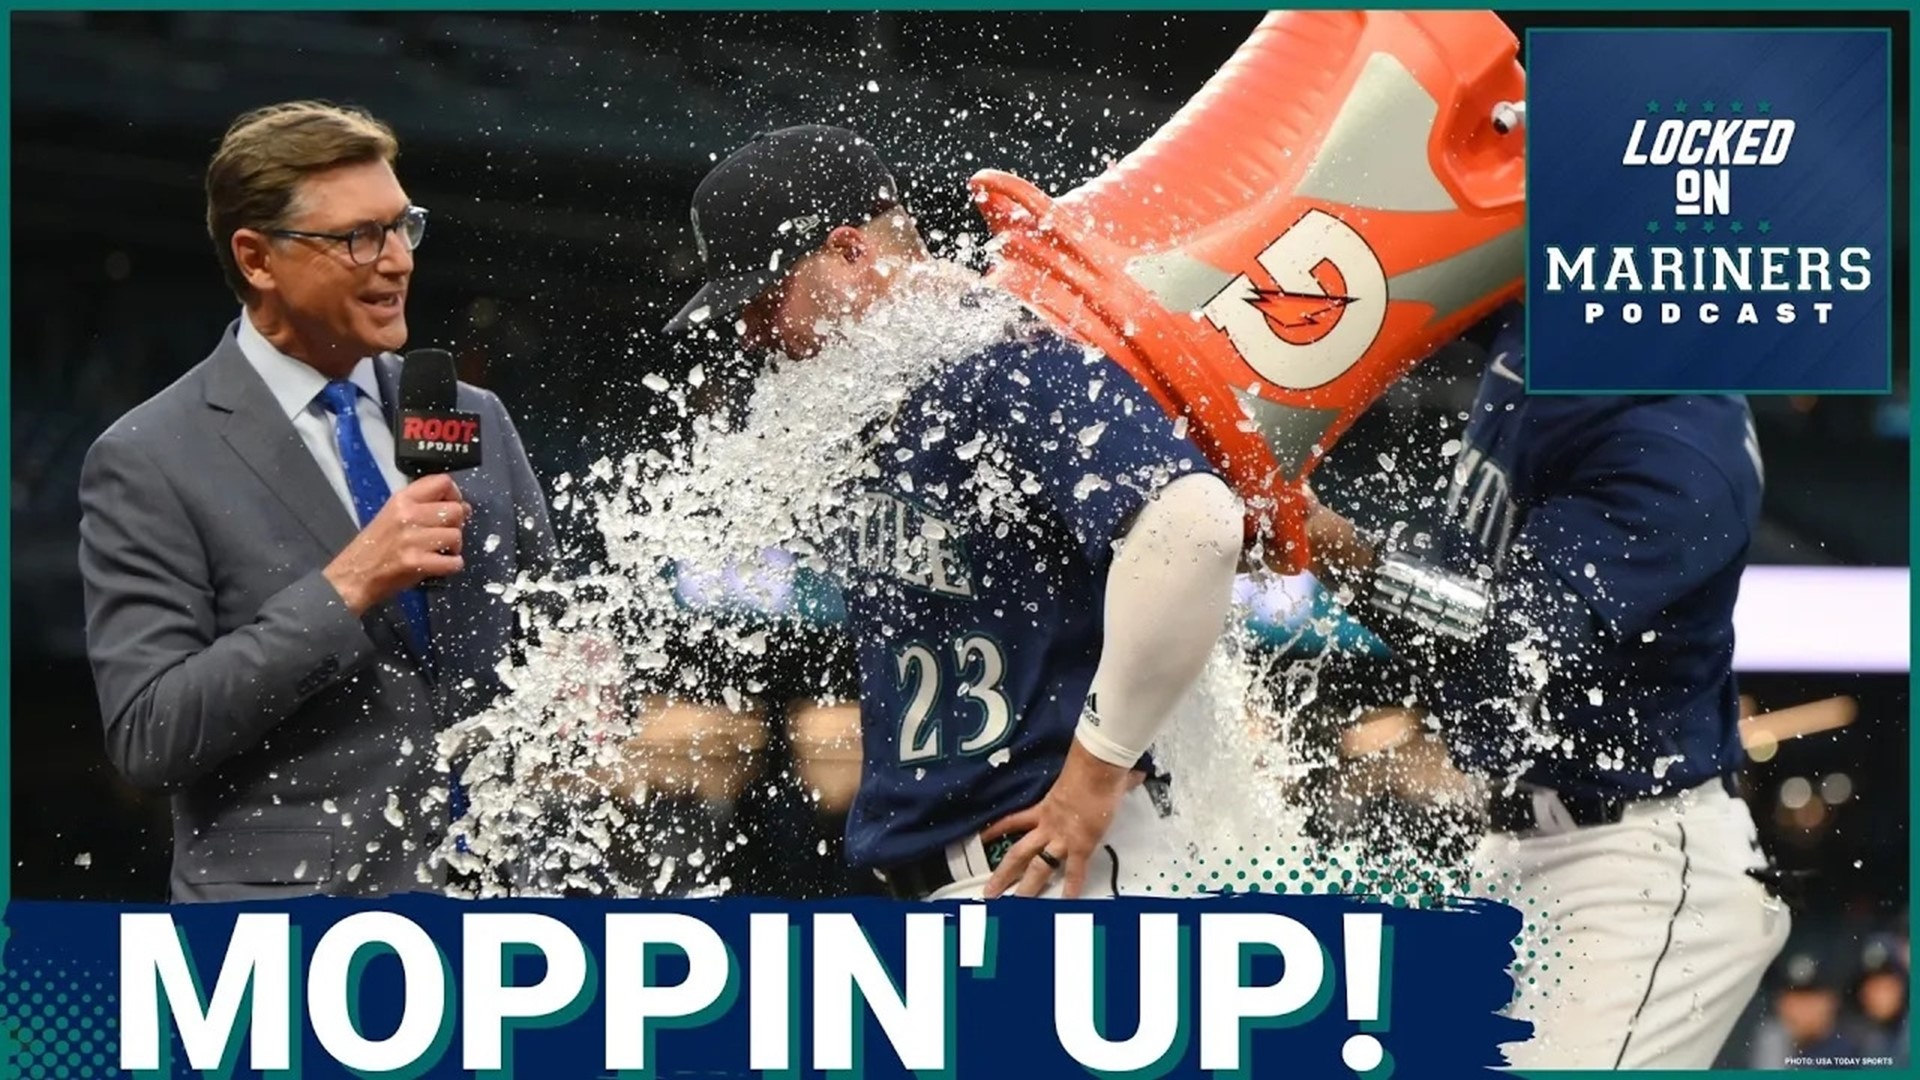 The Mariners are above .500 by two games for the first time this season, riding a brilliant performance from Logan Gilbert and a multi-home run night from Ty France.